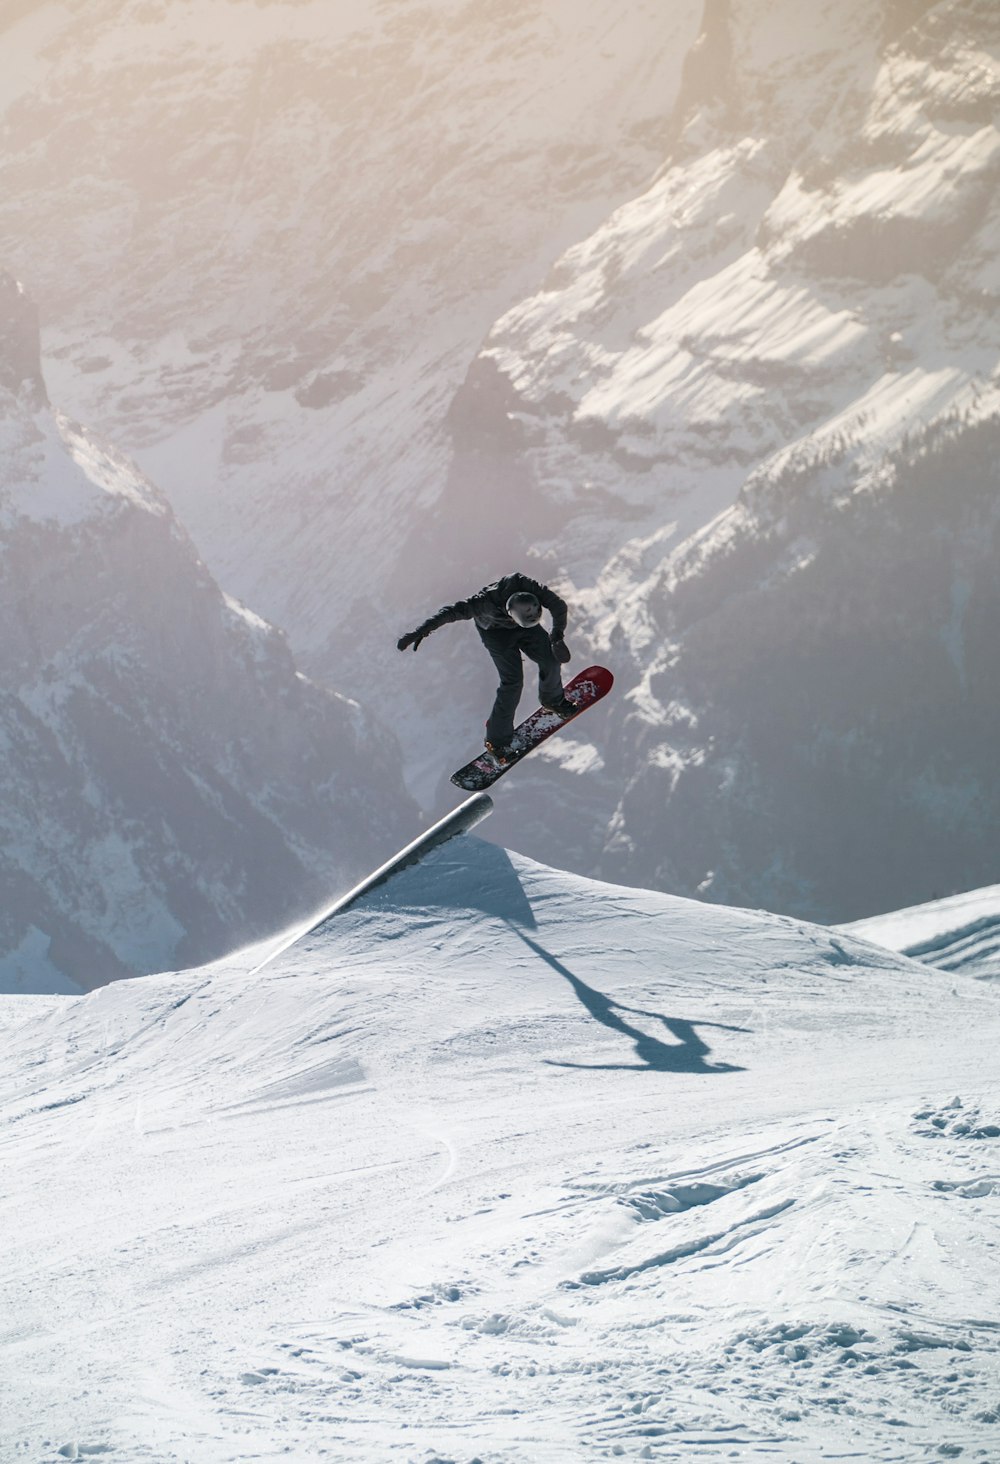 man in red jacket and black pants riding on ski blades on snow covered mountain during